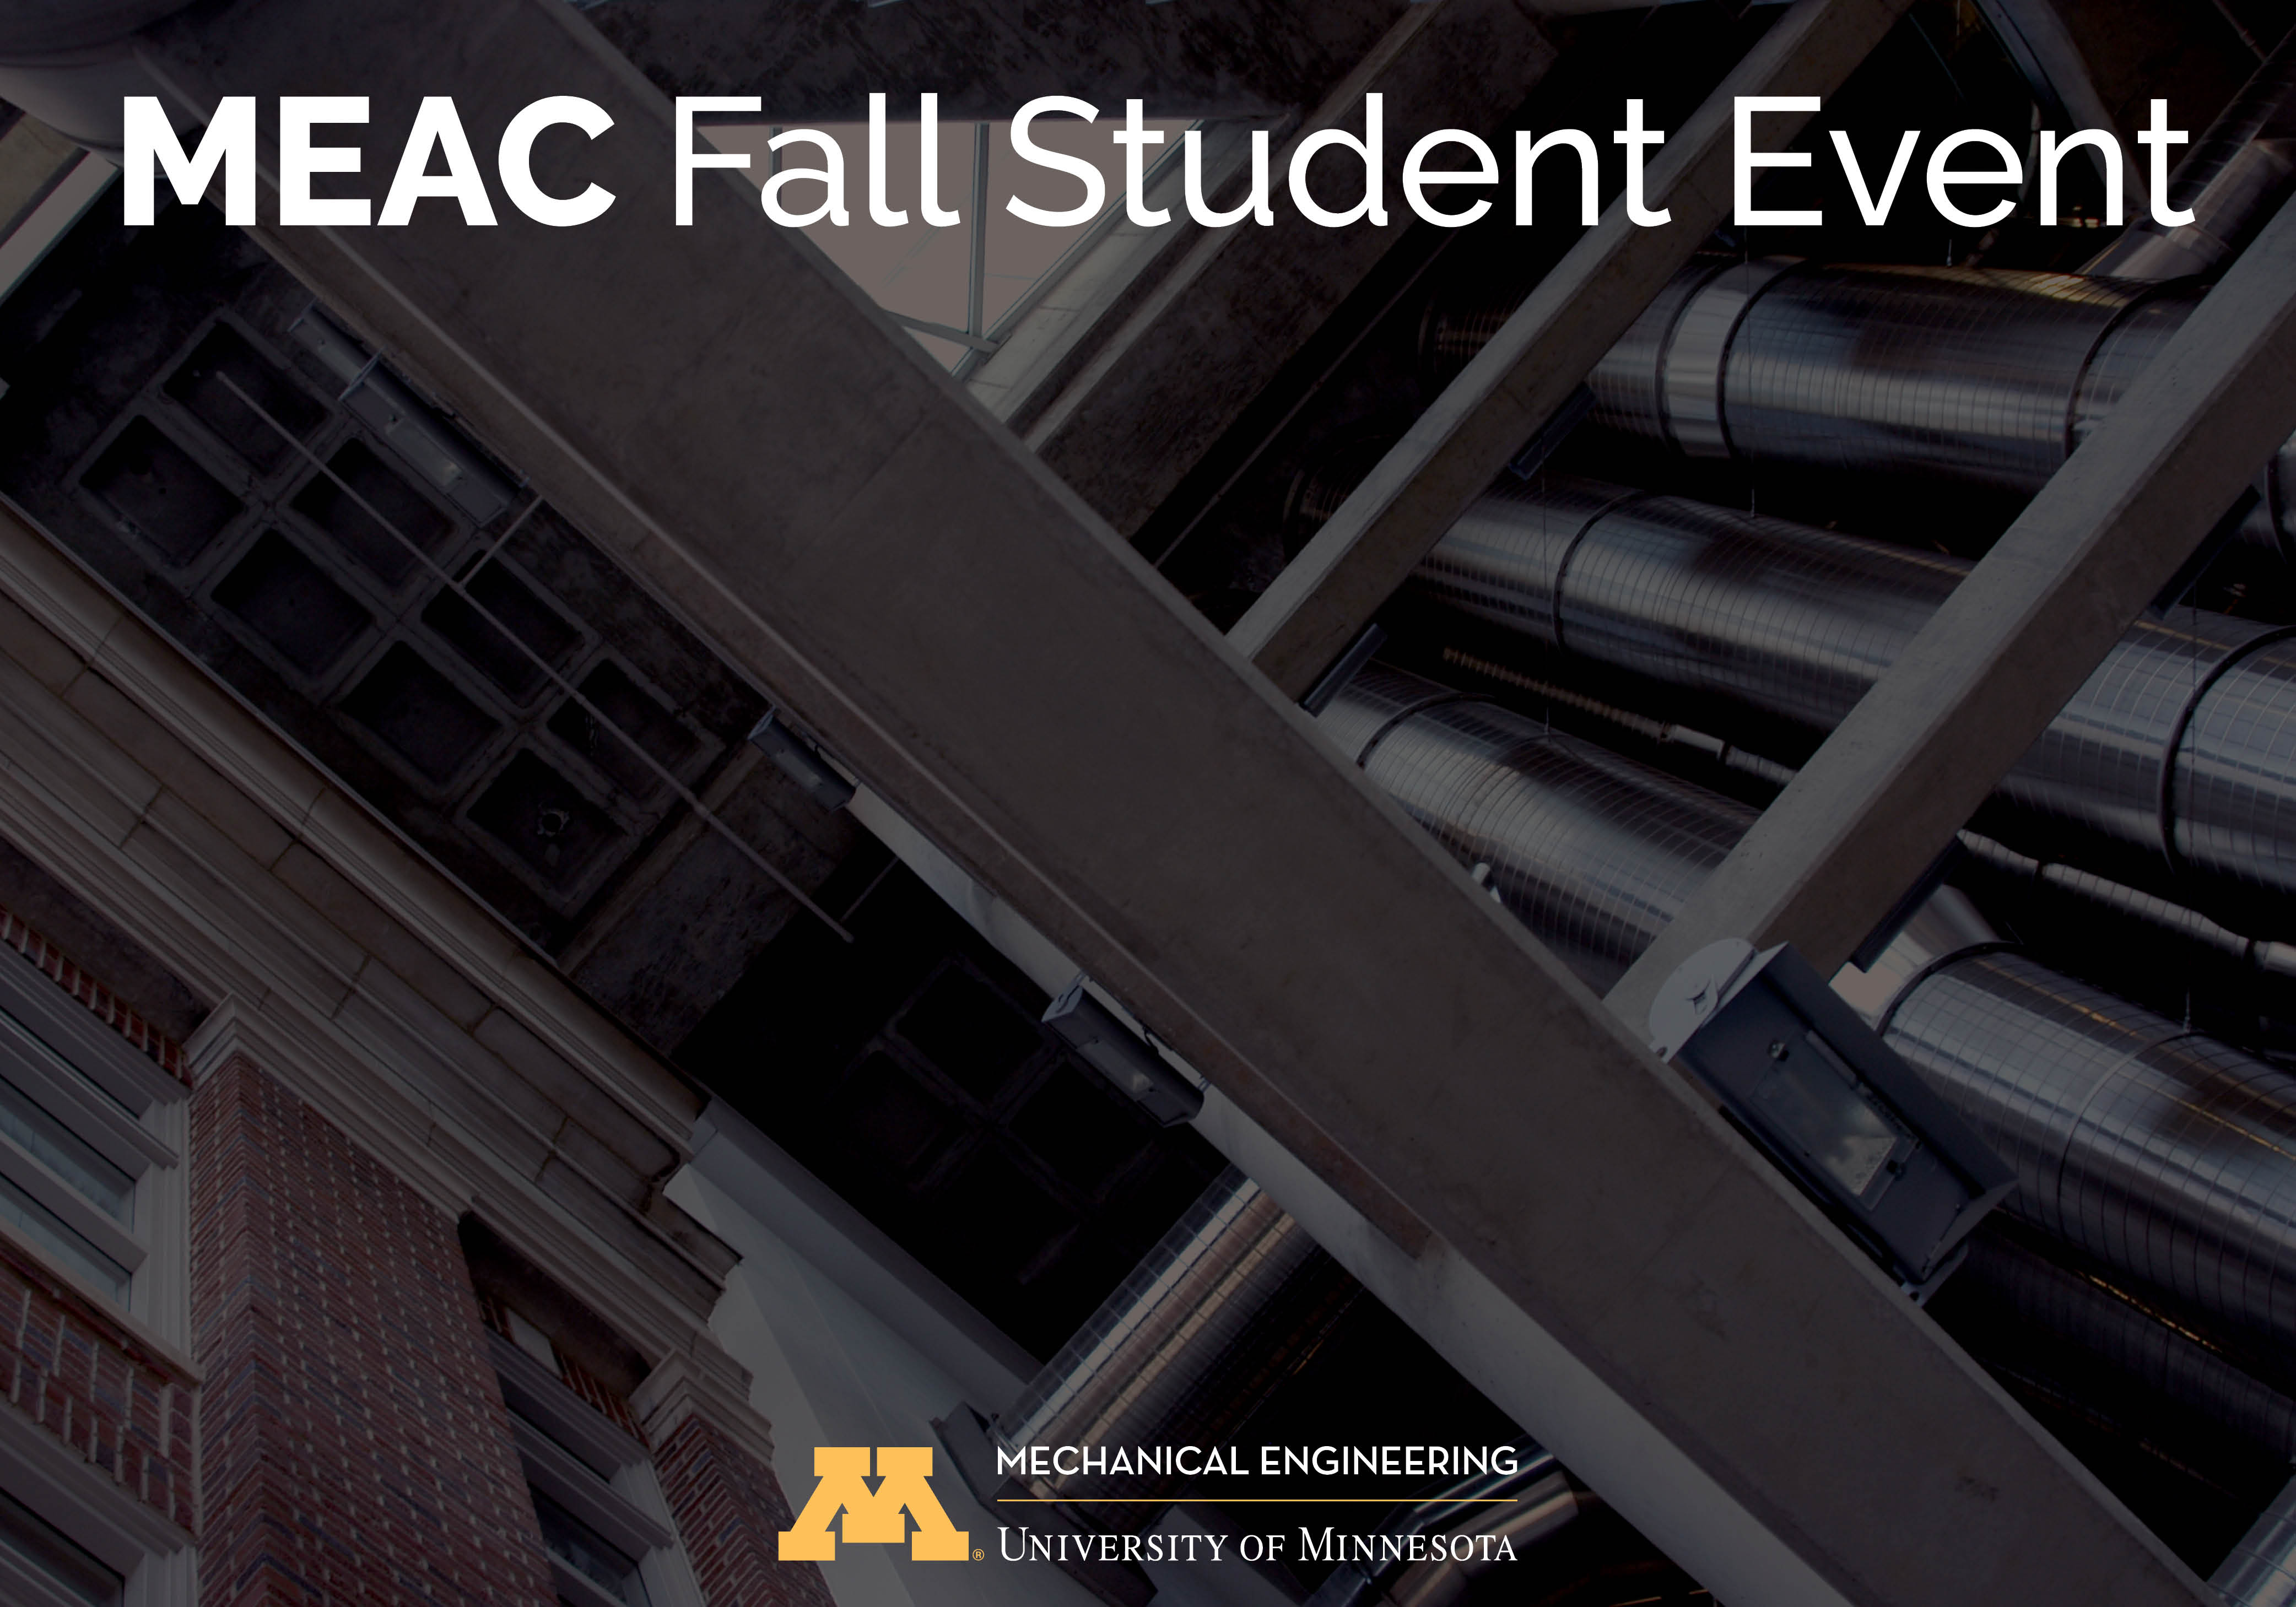 MEAC Fall Student Event branded image